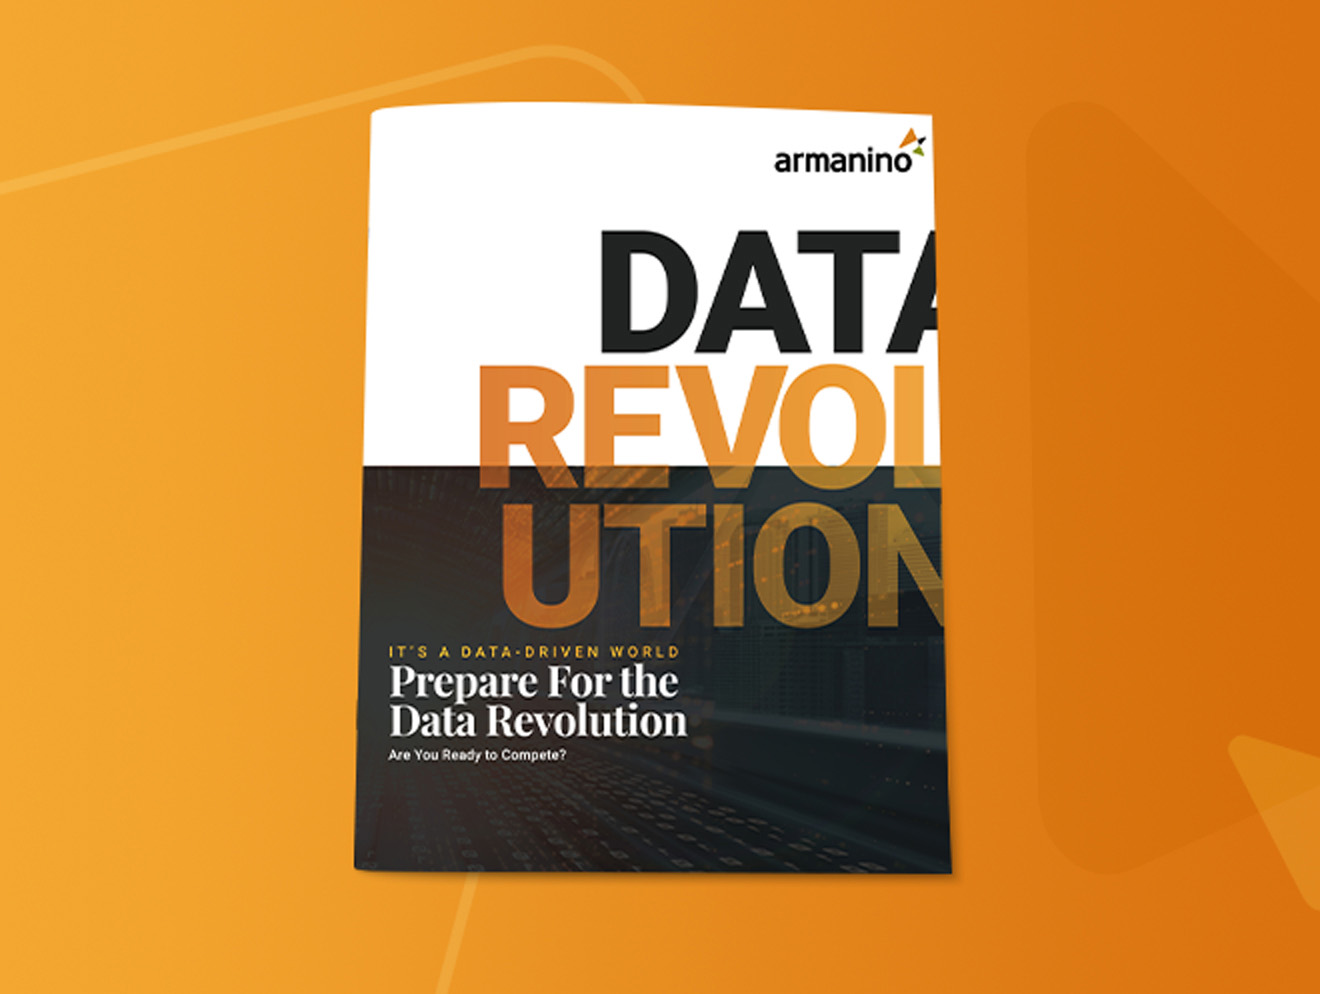 Prepare for the Data Revolution: It’s a Data-Driven World, Are You Ready to Compete?